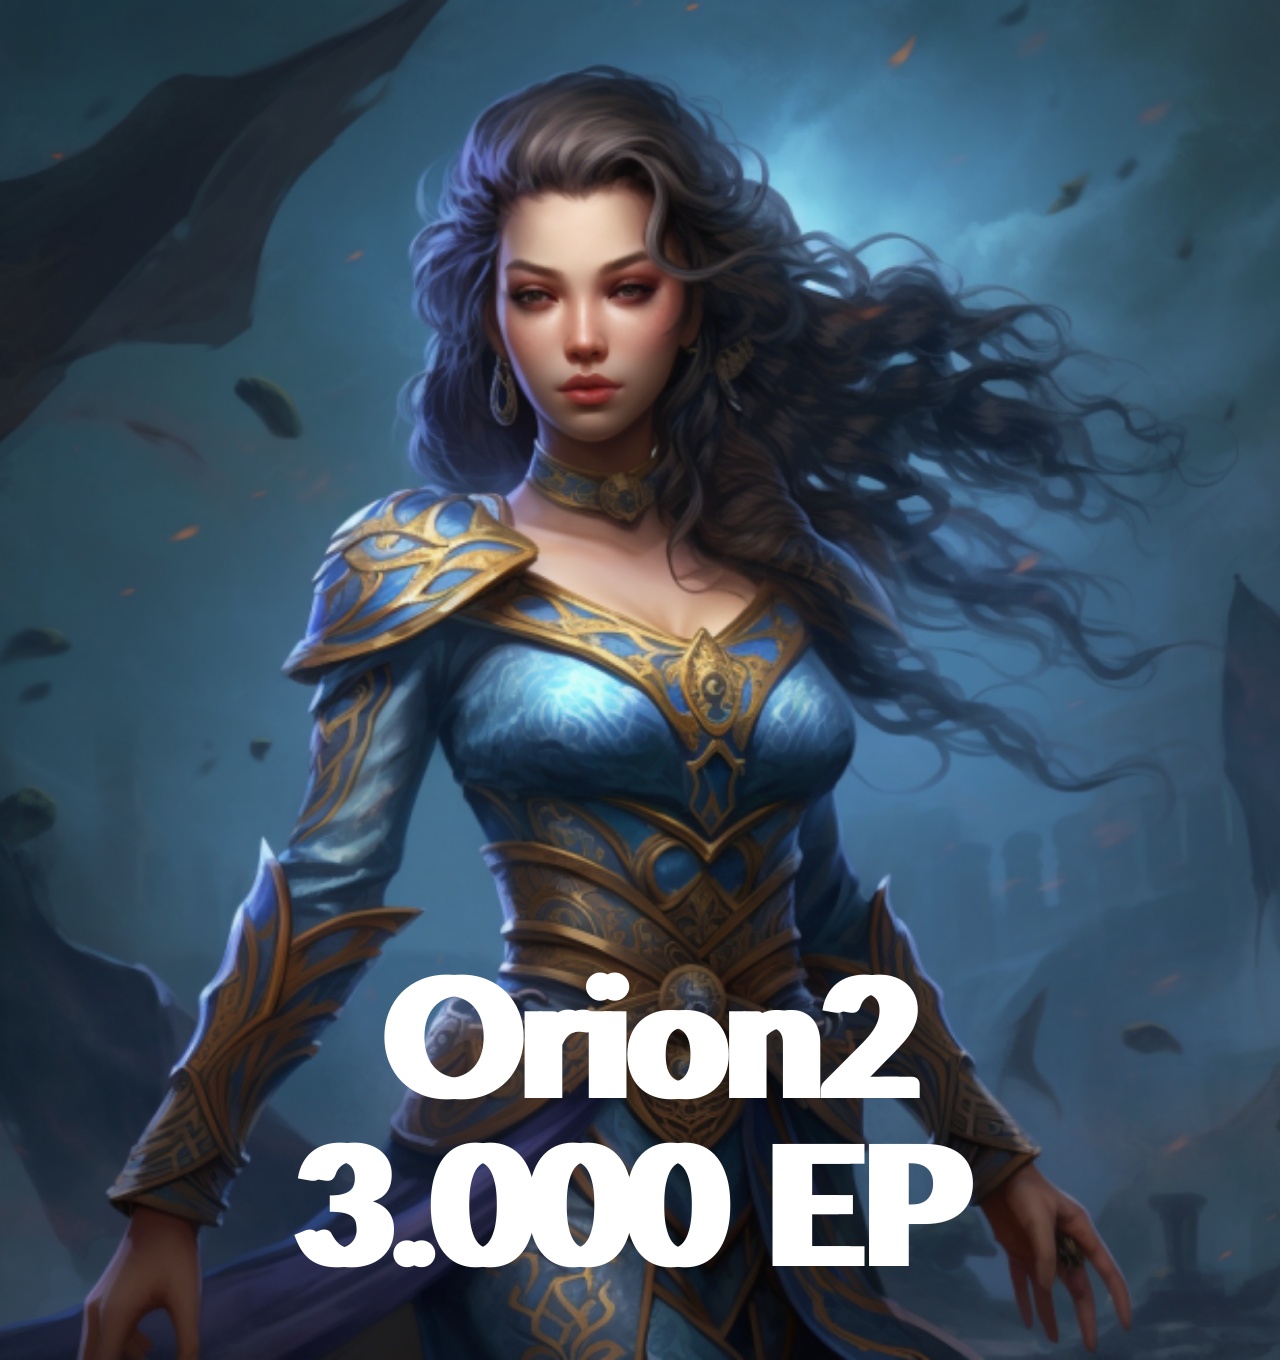 Orion2 3.000 EP